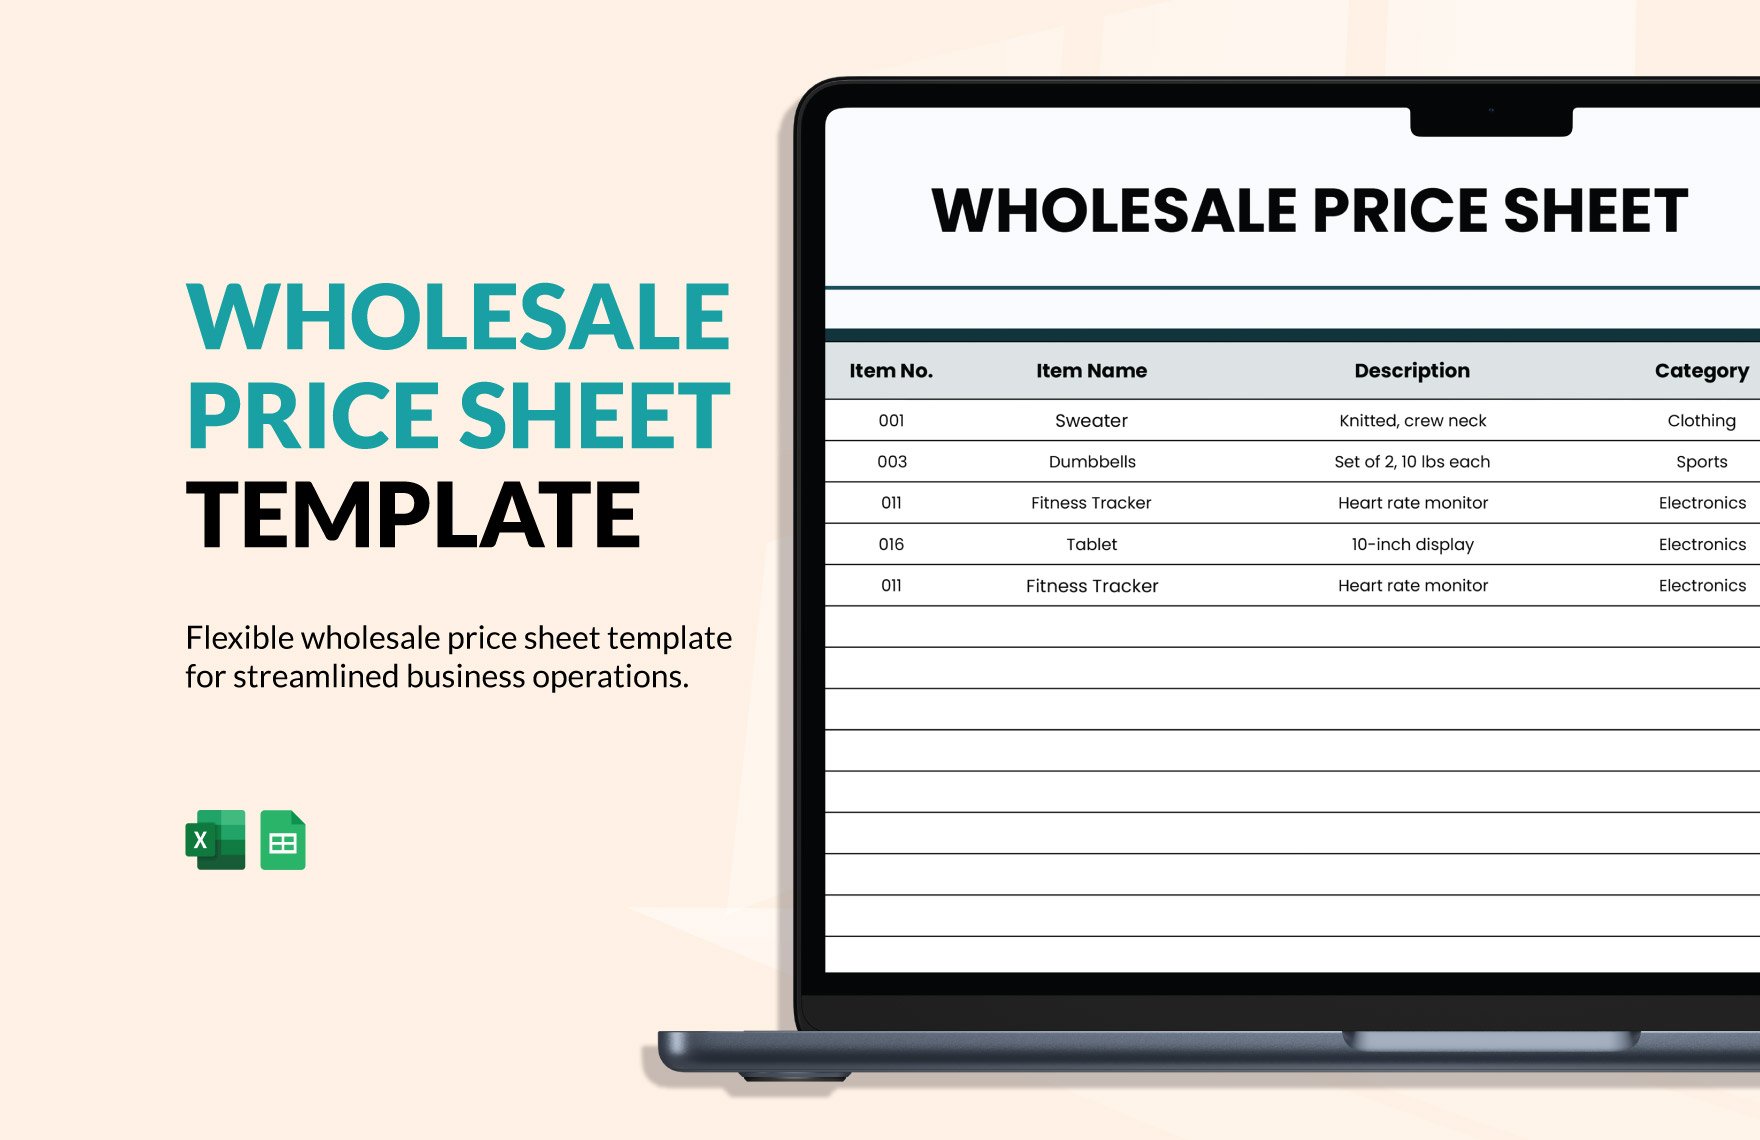 Wholesale Price Sheet Template in Excel, Google Sheets